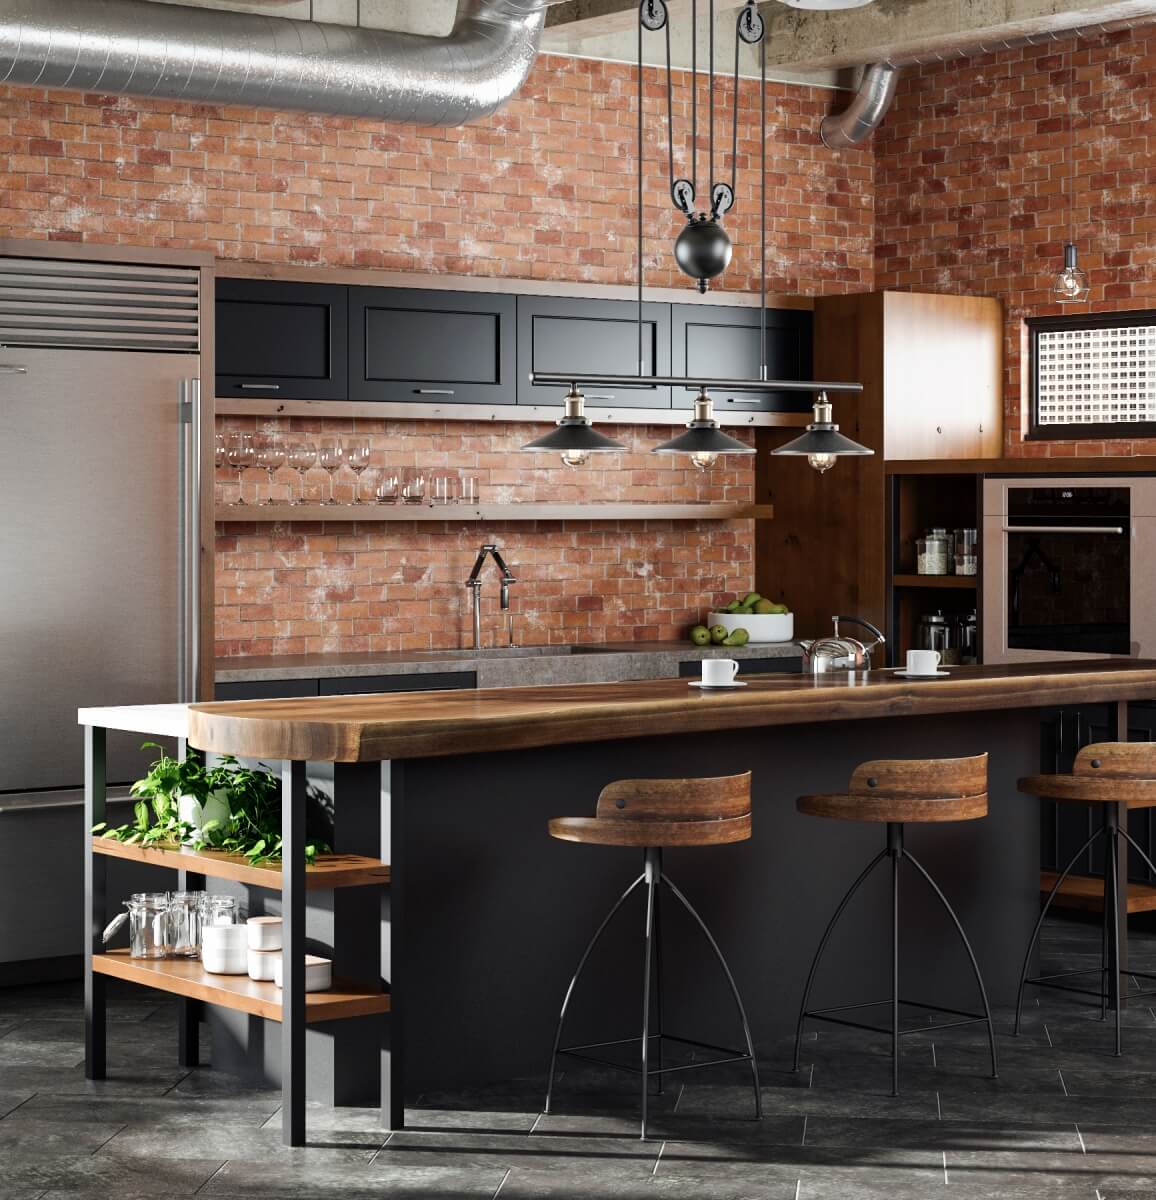 An Industrial style kitchen design in an urban loft with exposed brick walls and duct-work. The cabinets use a black painted finish and accents in a wood with a warm stain.